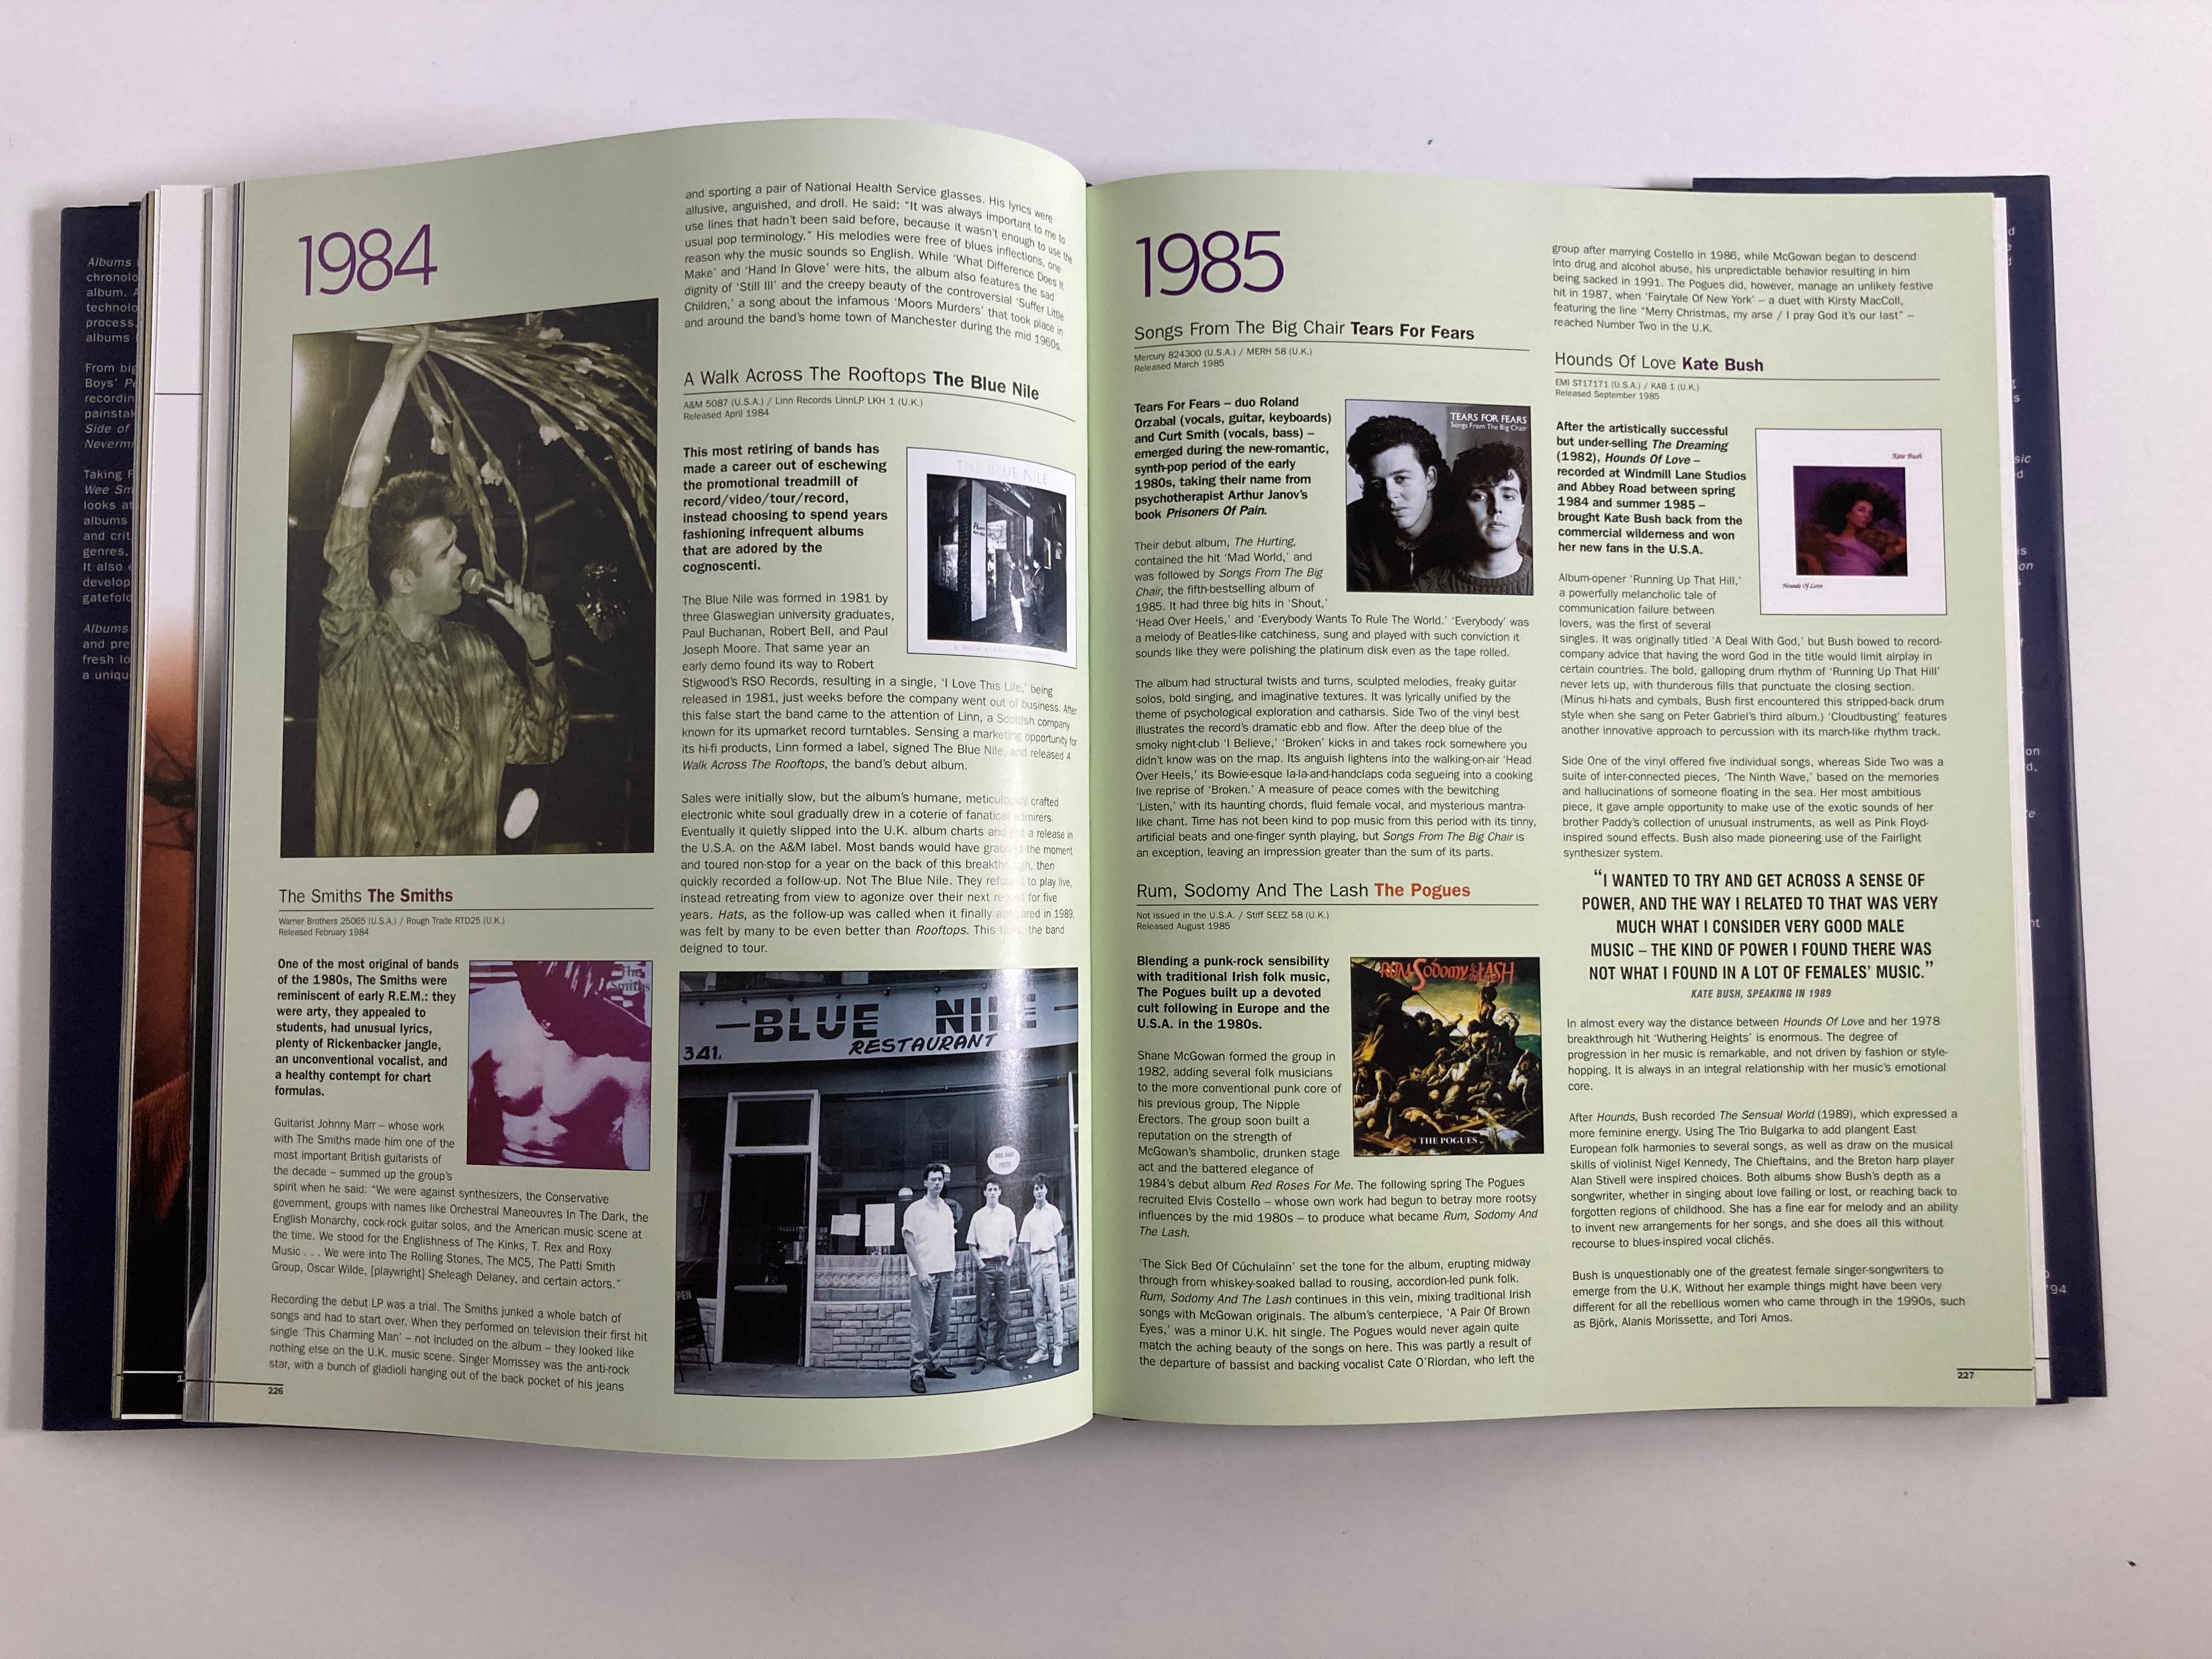 The Stories Behind 50 Years of Great Recordings Hardcover Table Book 2